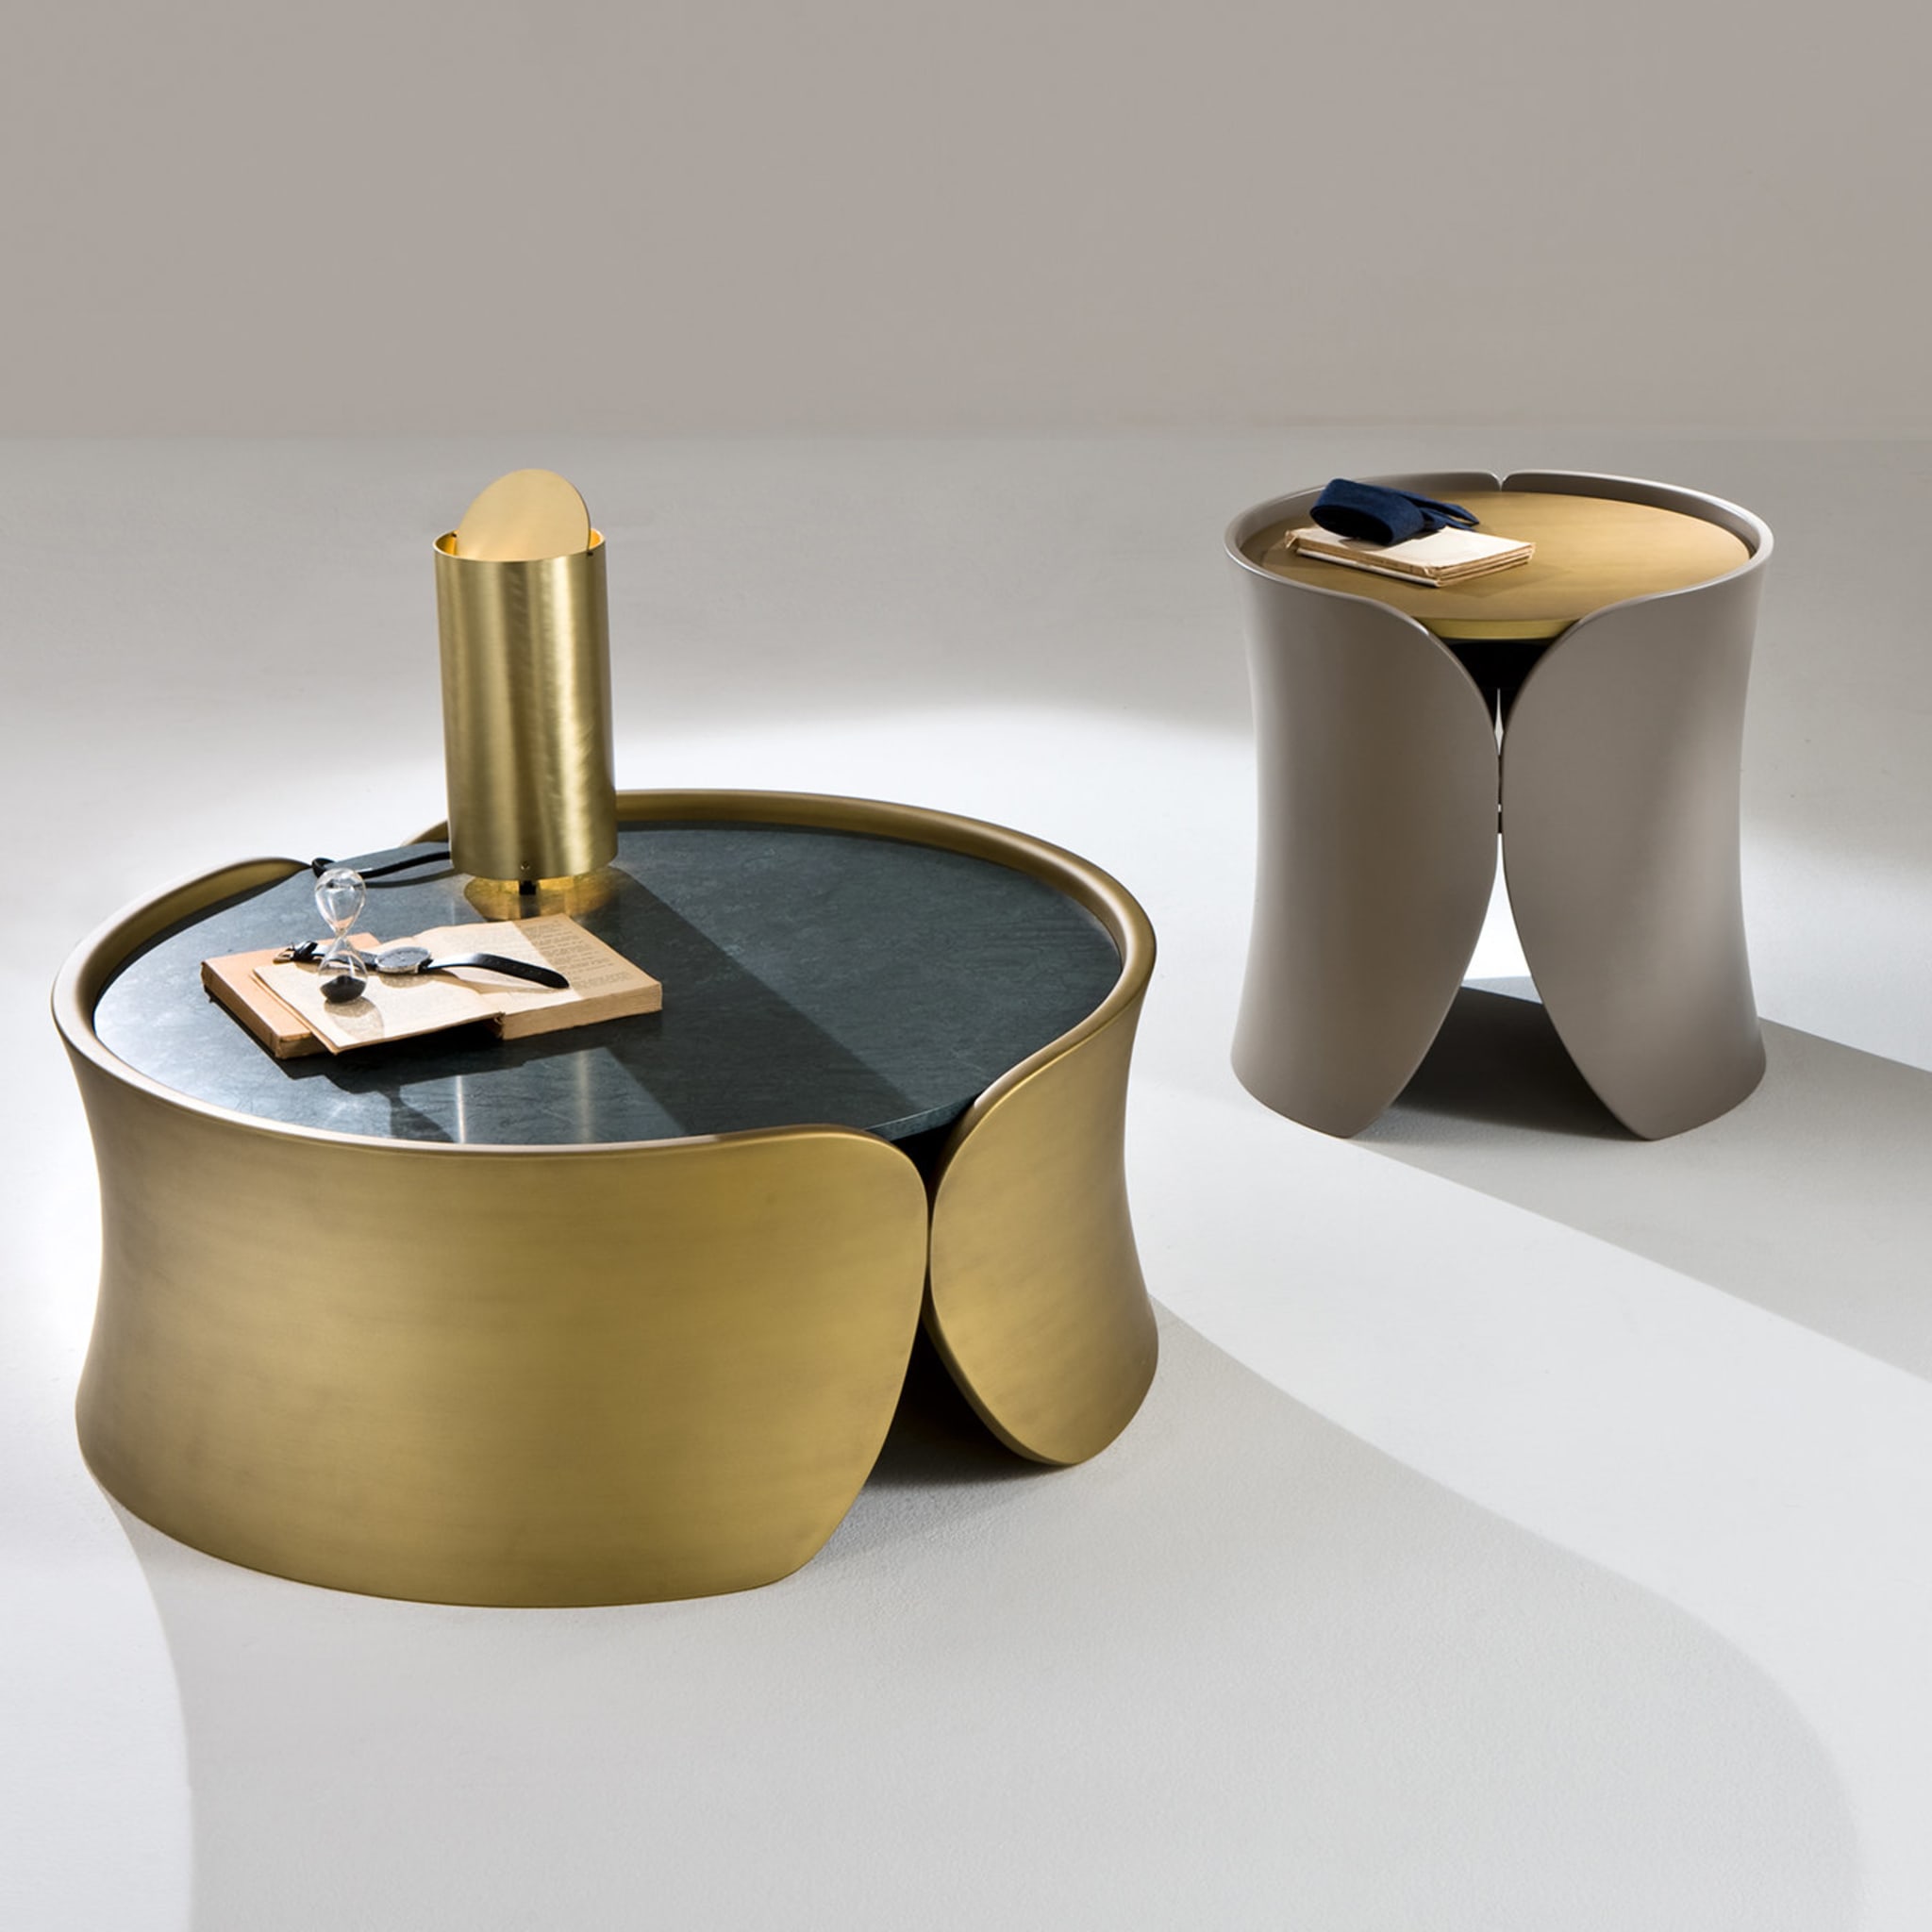 Hug Side Table by Cesare Arosio - Alternative view 1